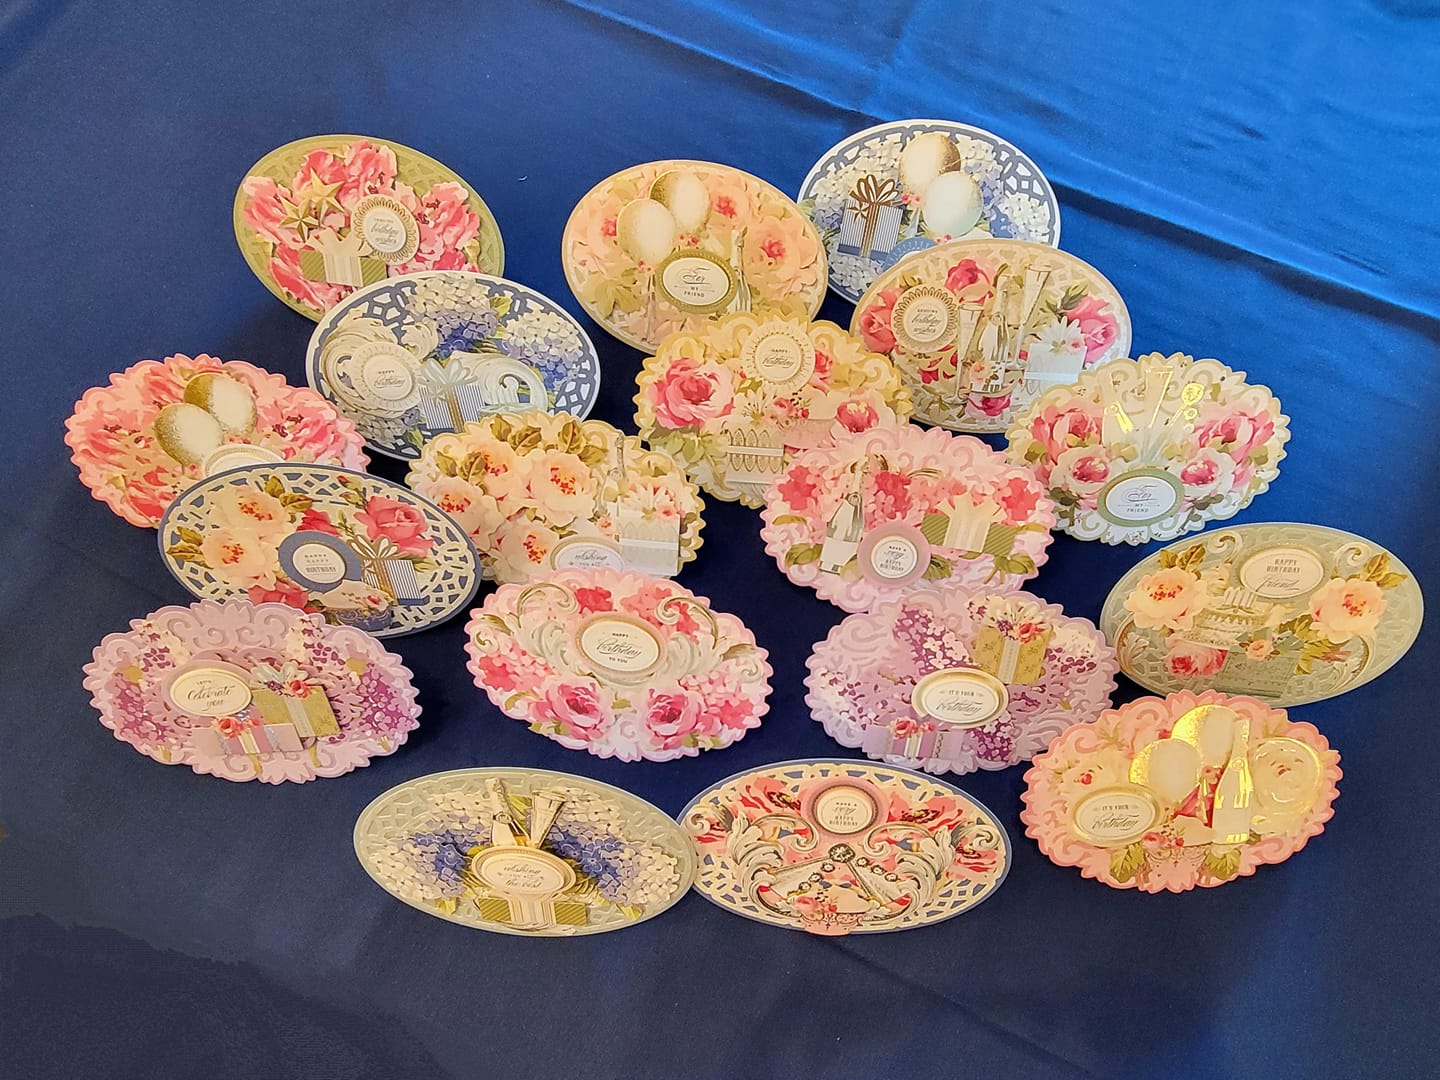 A group of cupcakes with floral designs on them.